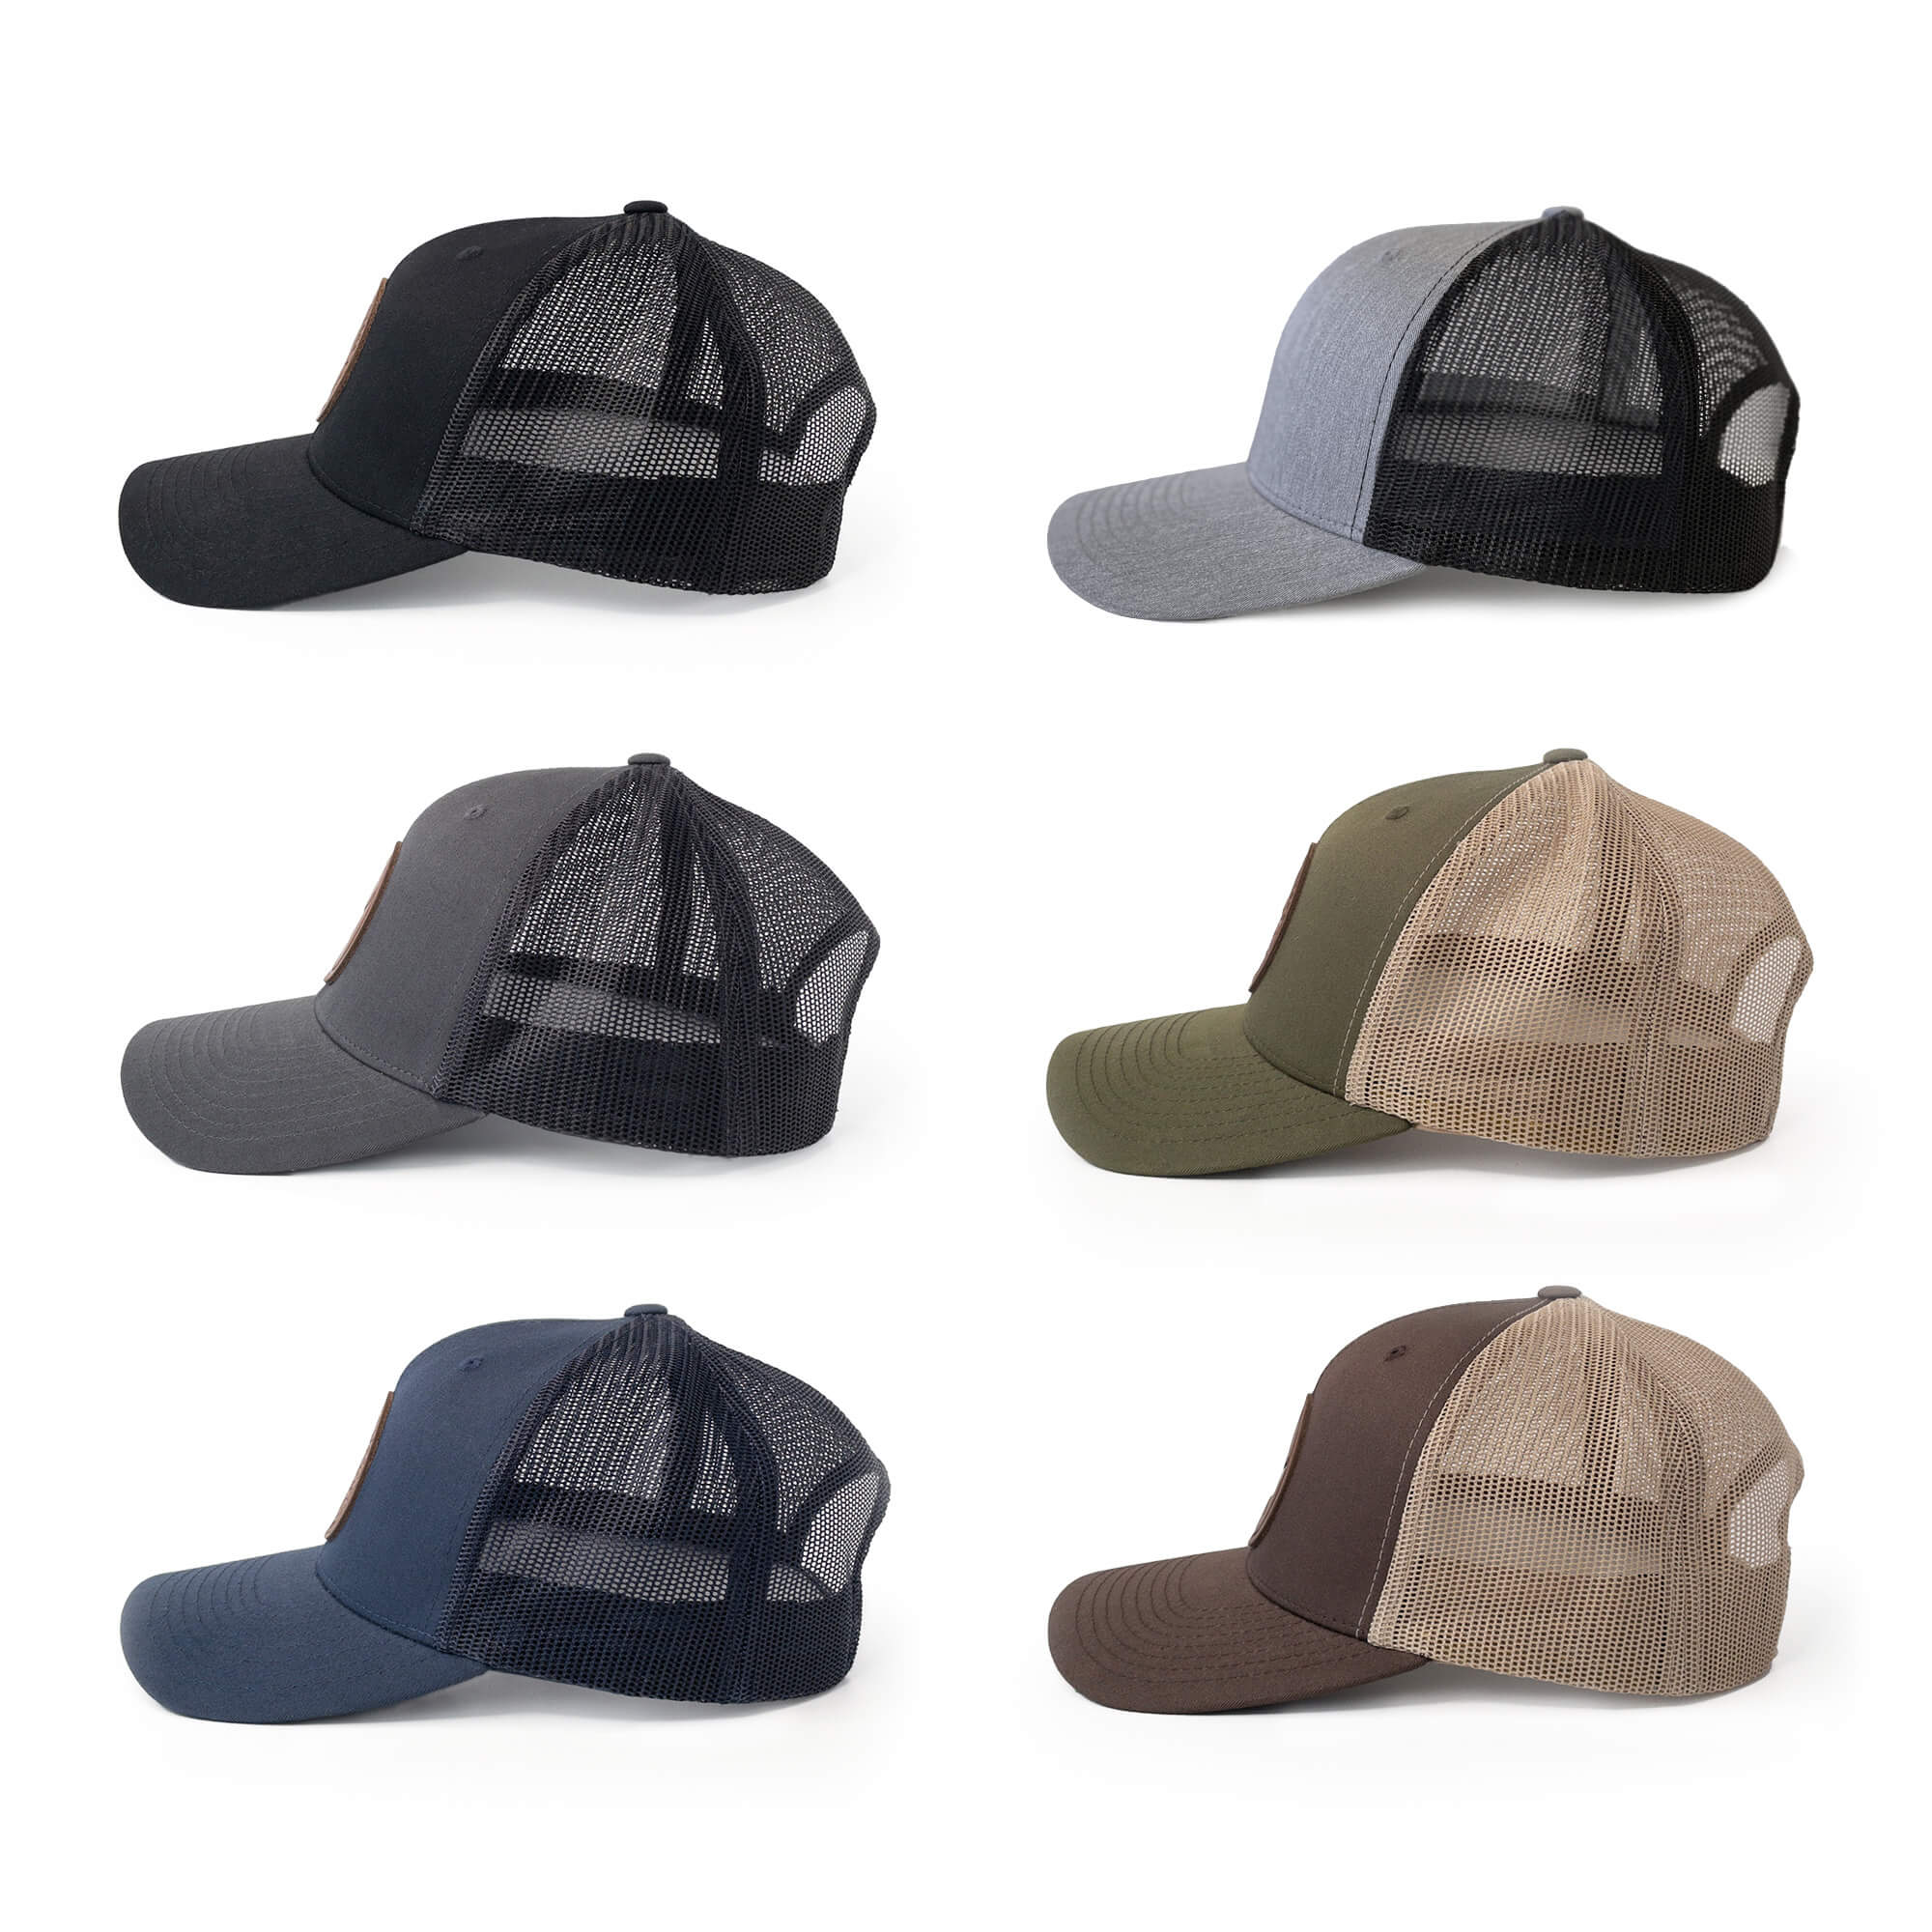 Leather patch trucker hats available in 6 colors | BLACK-003-013, CHARC-003-013, NAVY-003-013, HGREY-003-013, MOSS-003-013, BROWN-003-013